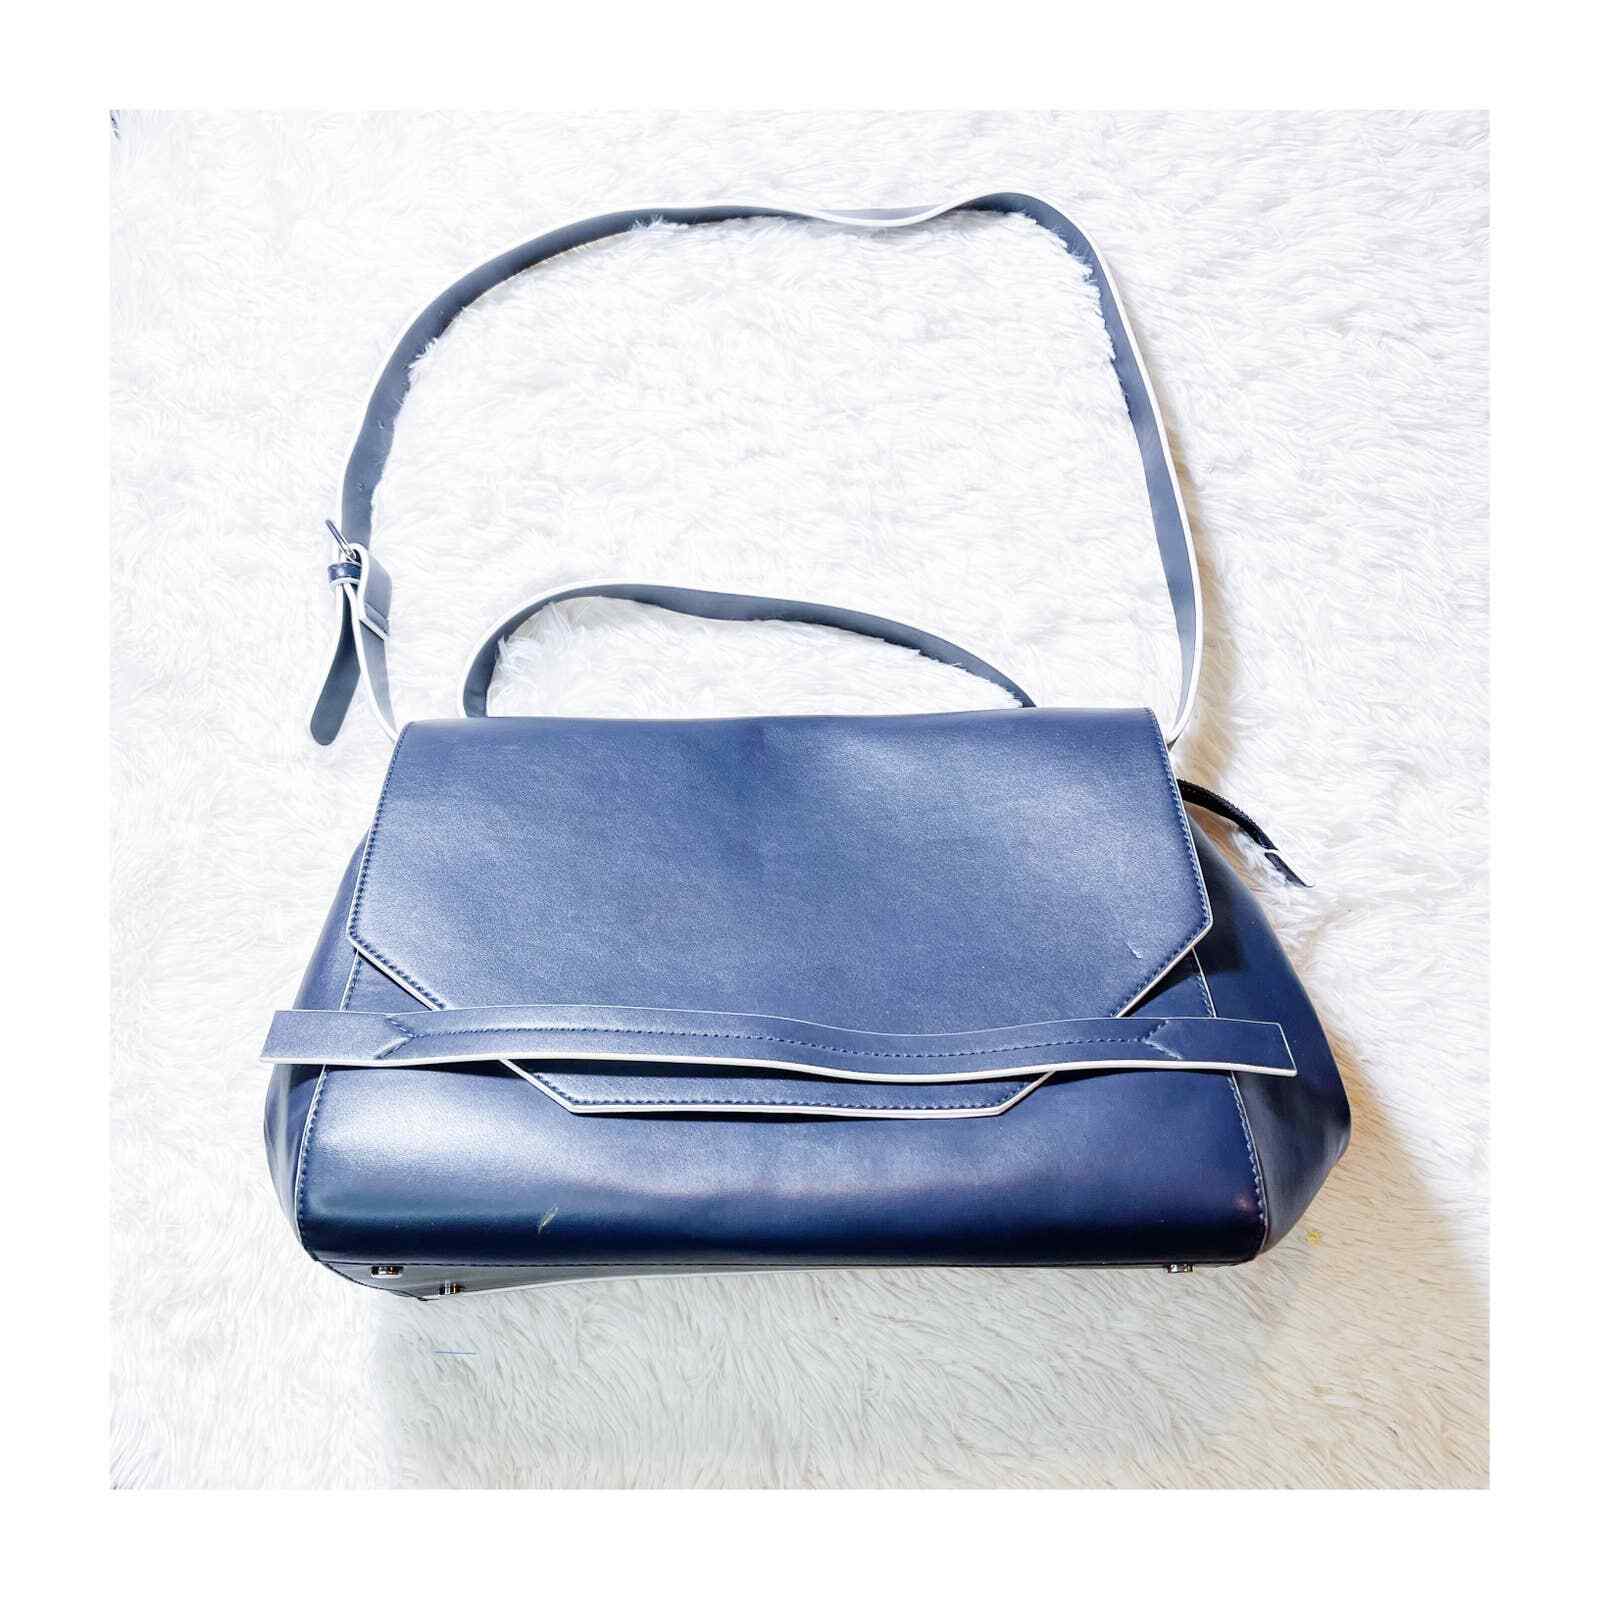 French Connection Navy Leather Satchel With Crossbody Strap Mint